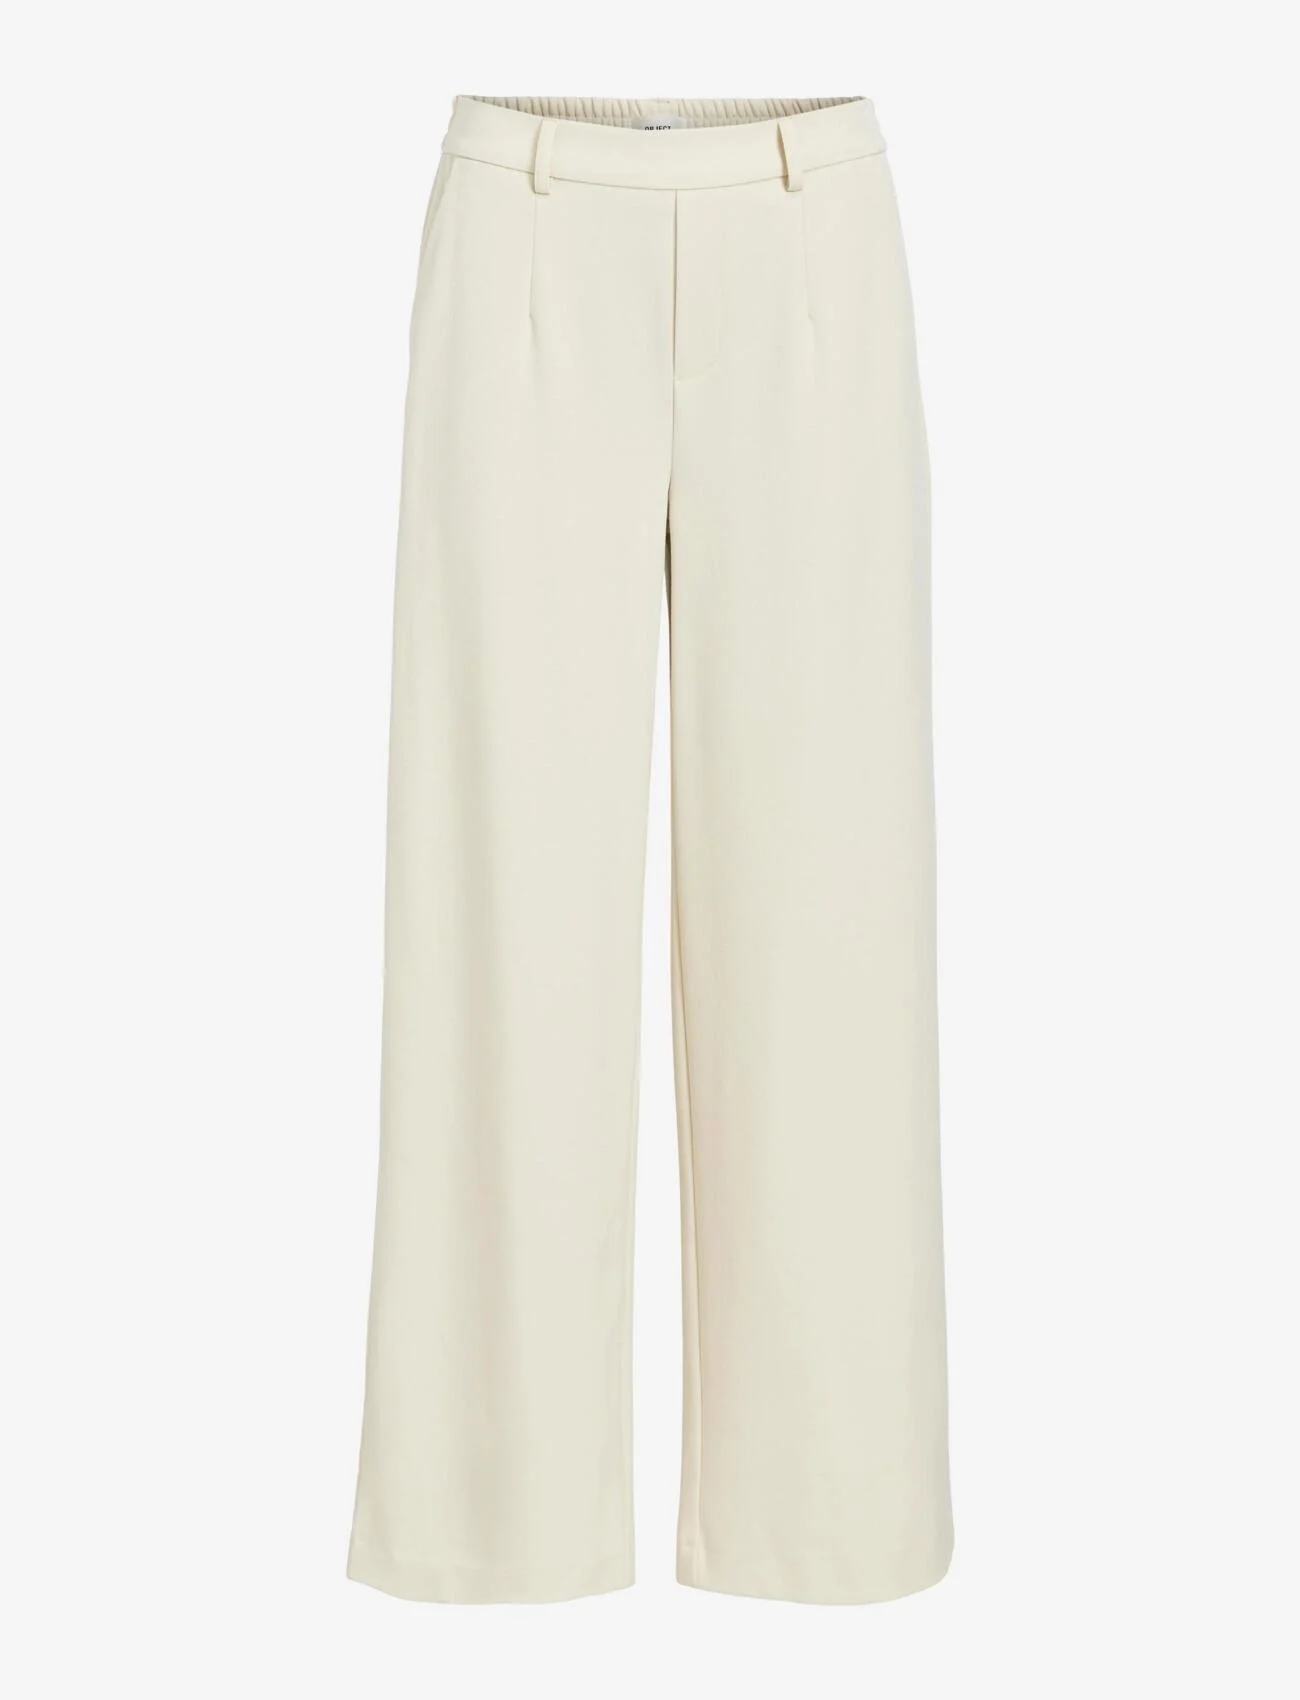 Object - OBJLISA WIDE PANT NOOS - party wear at outlet prices - sandshell - 0